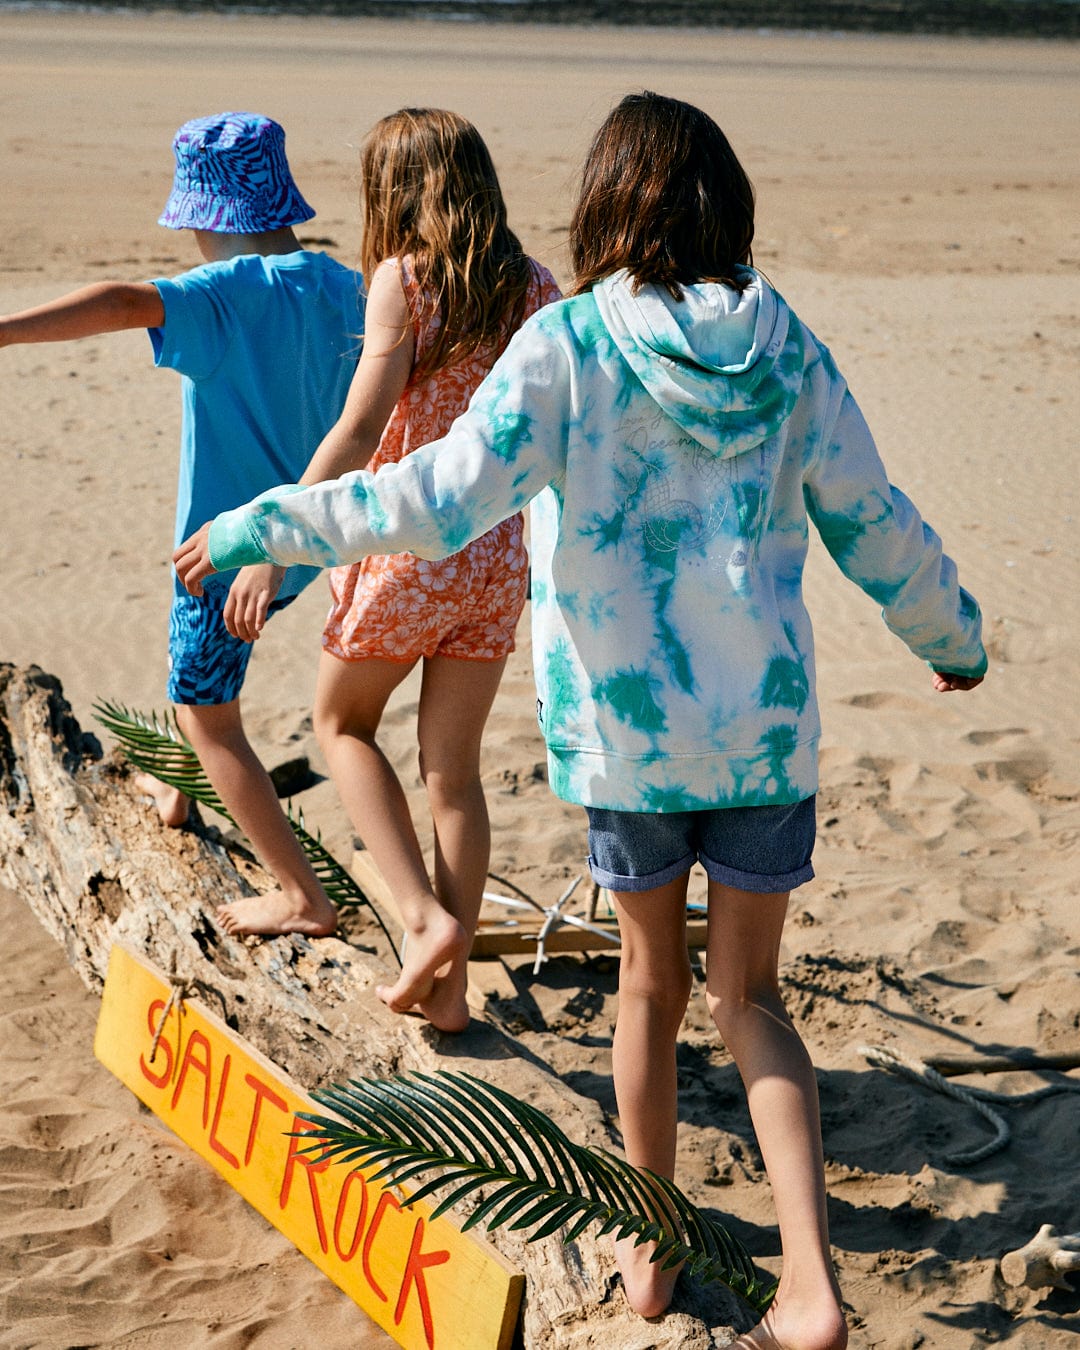 Three children balance on a large piece of driftwood on a sandy beach. A yellow sign with "SALTROCK" written in red underscores the Saltrock branding, while hints of tie dye patterns from the Mermaid Surf - Kids Tie Dye Pop Hoodie - Turquoise/White by Saltrock dance in the background.